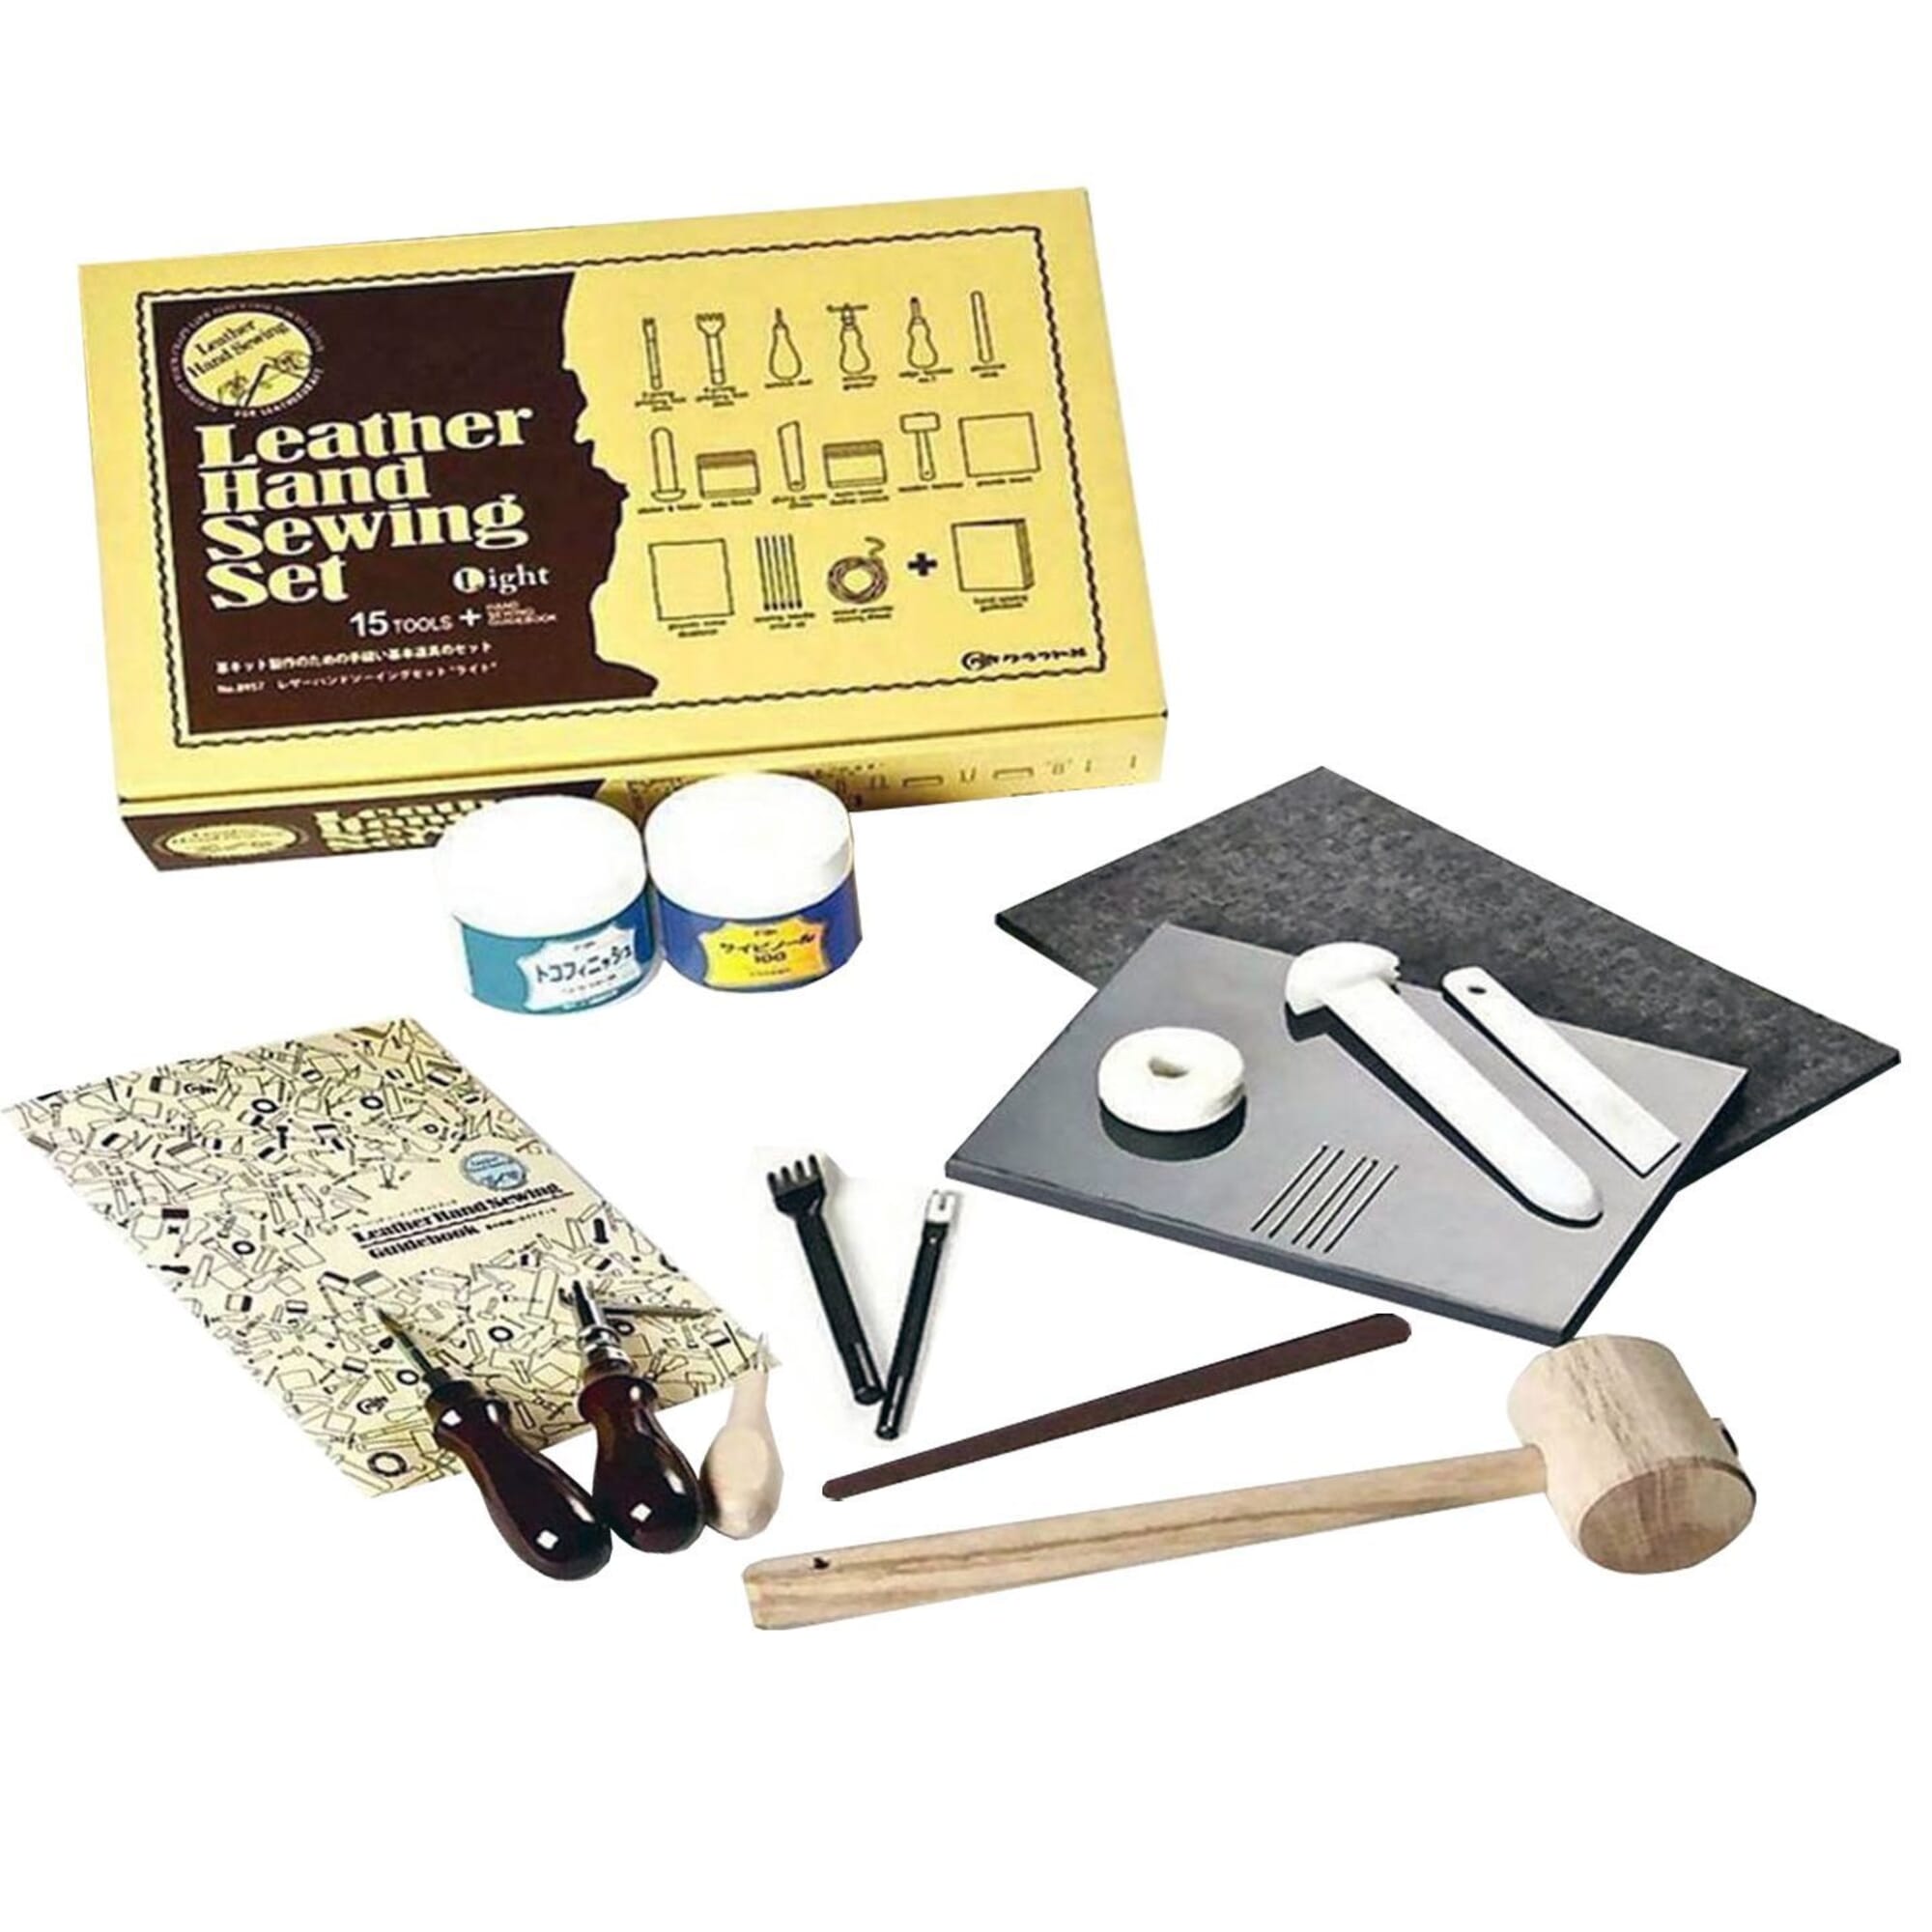 Leathercraft Tool Craft Hand Leather Sewing Set